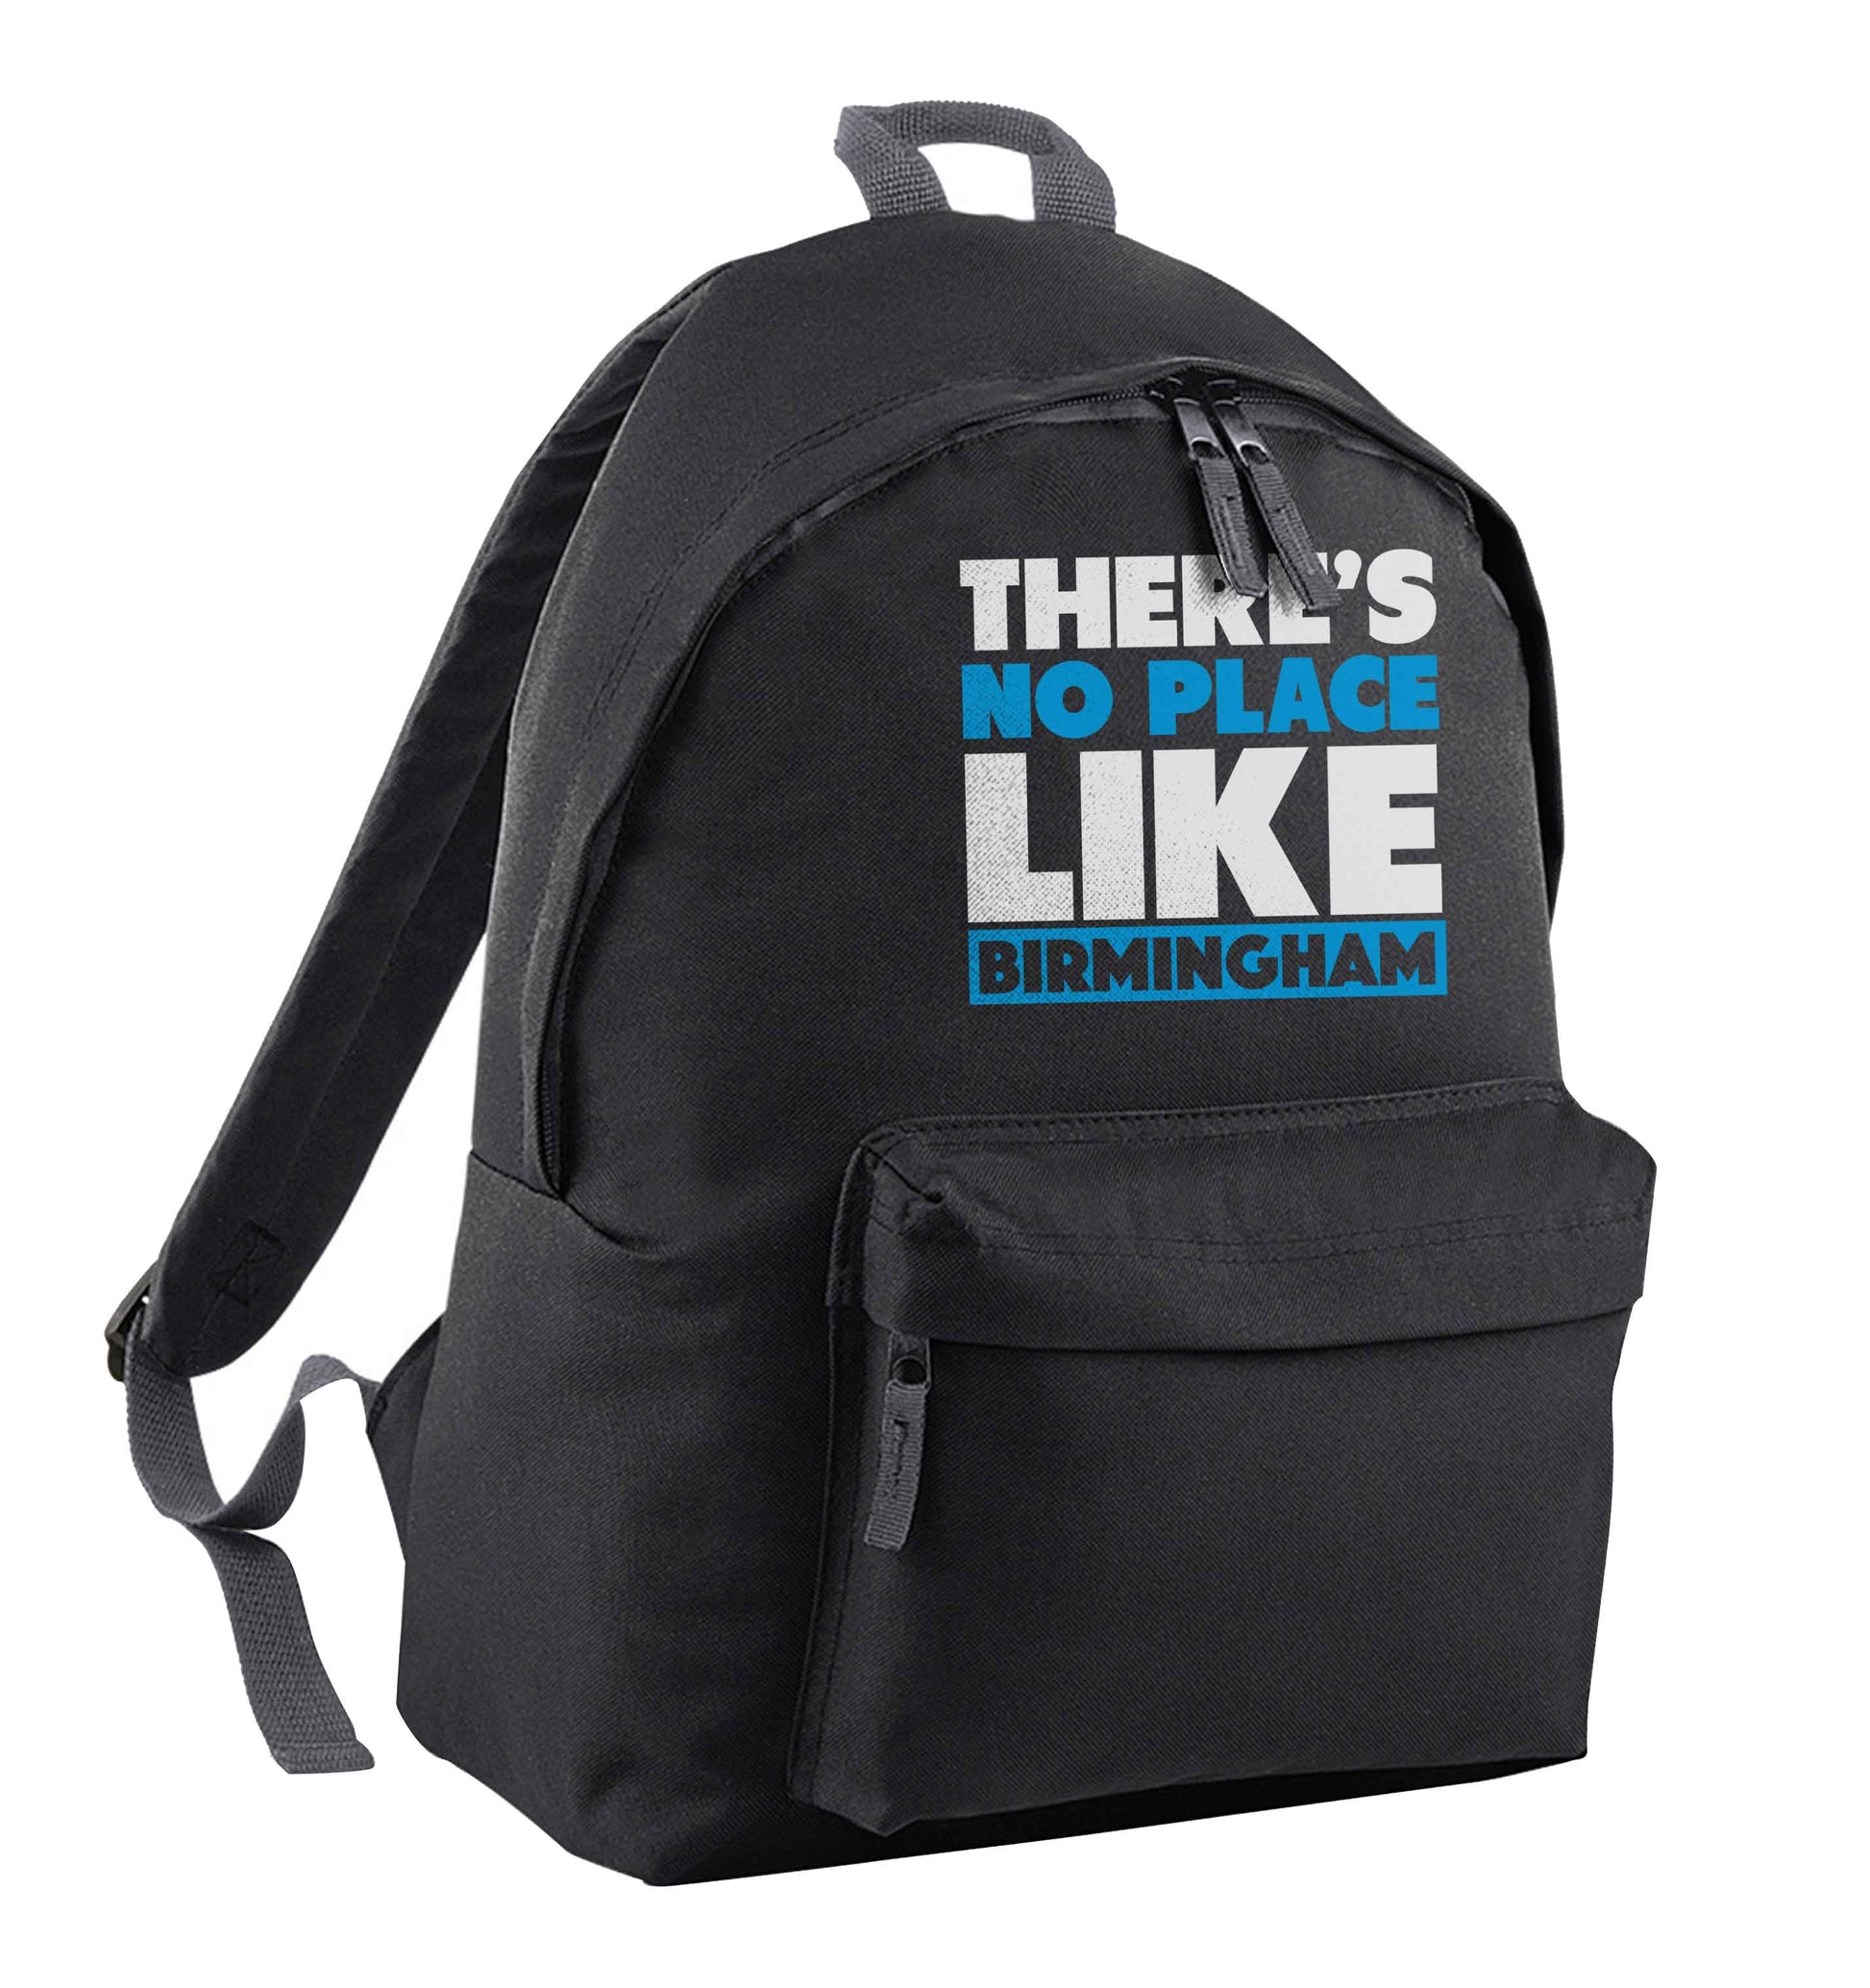 There's no place like Birmingham black adults backpack